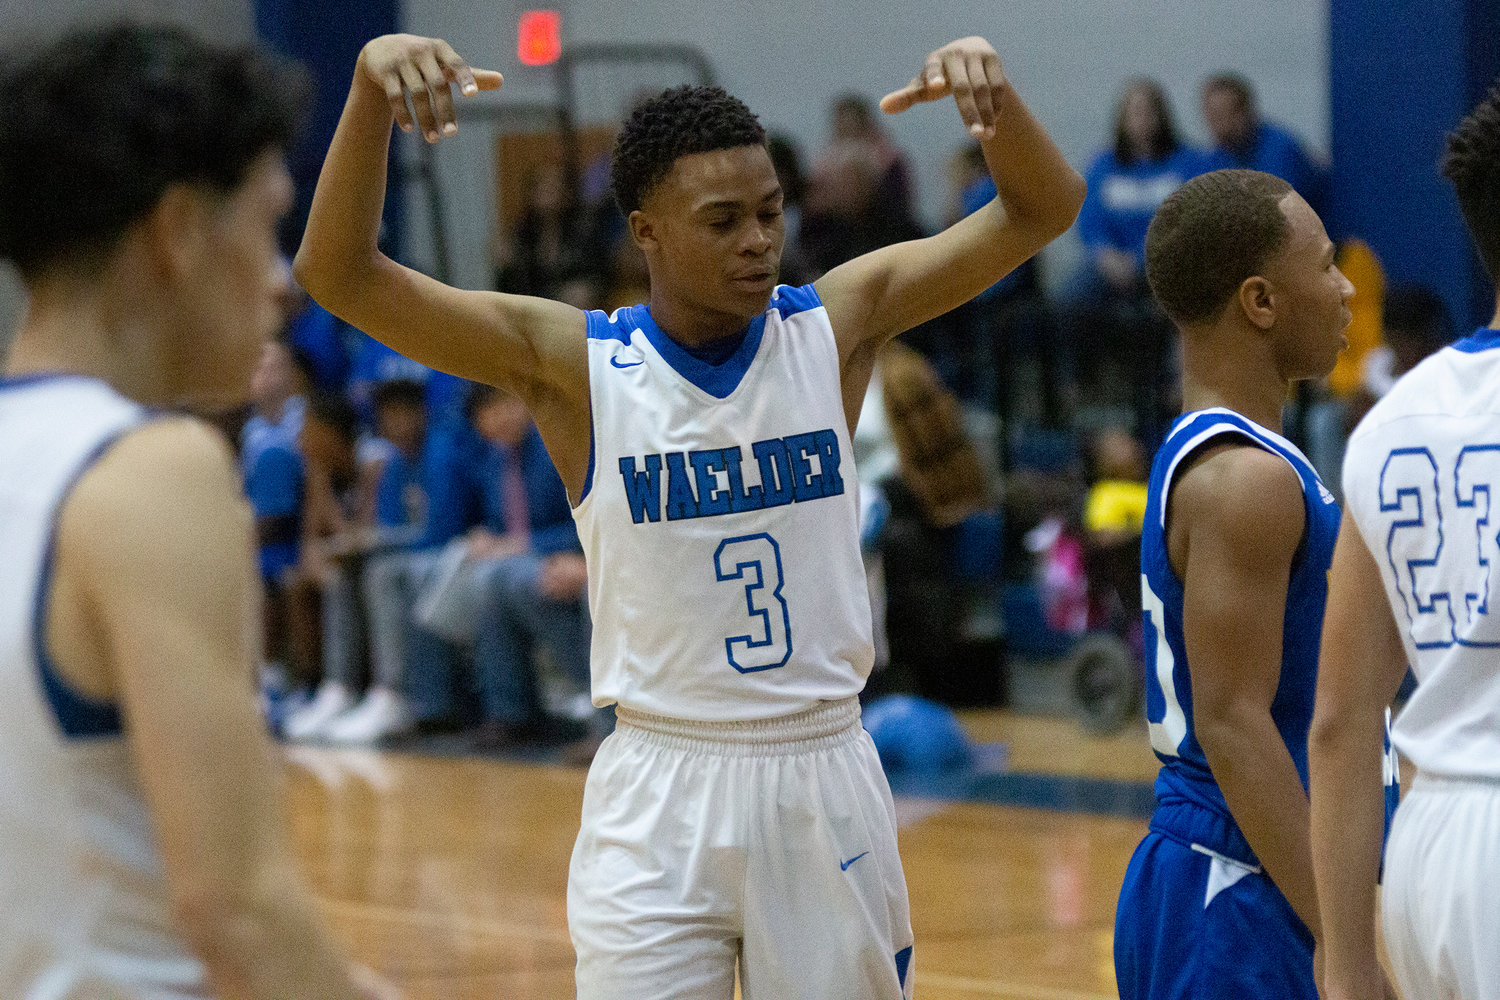 Jacovan Fields (13) celebrates after scoring in Waelder’s 72-57 victory over Dime Box last Friday. The homecoming king finished the game with 13 points.